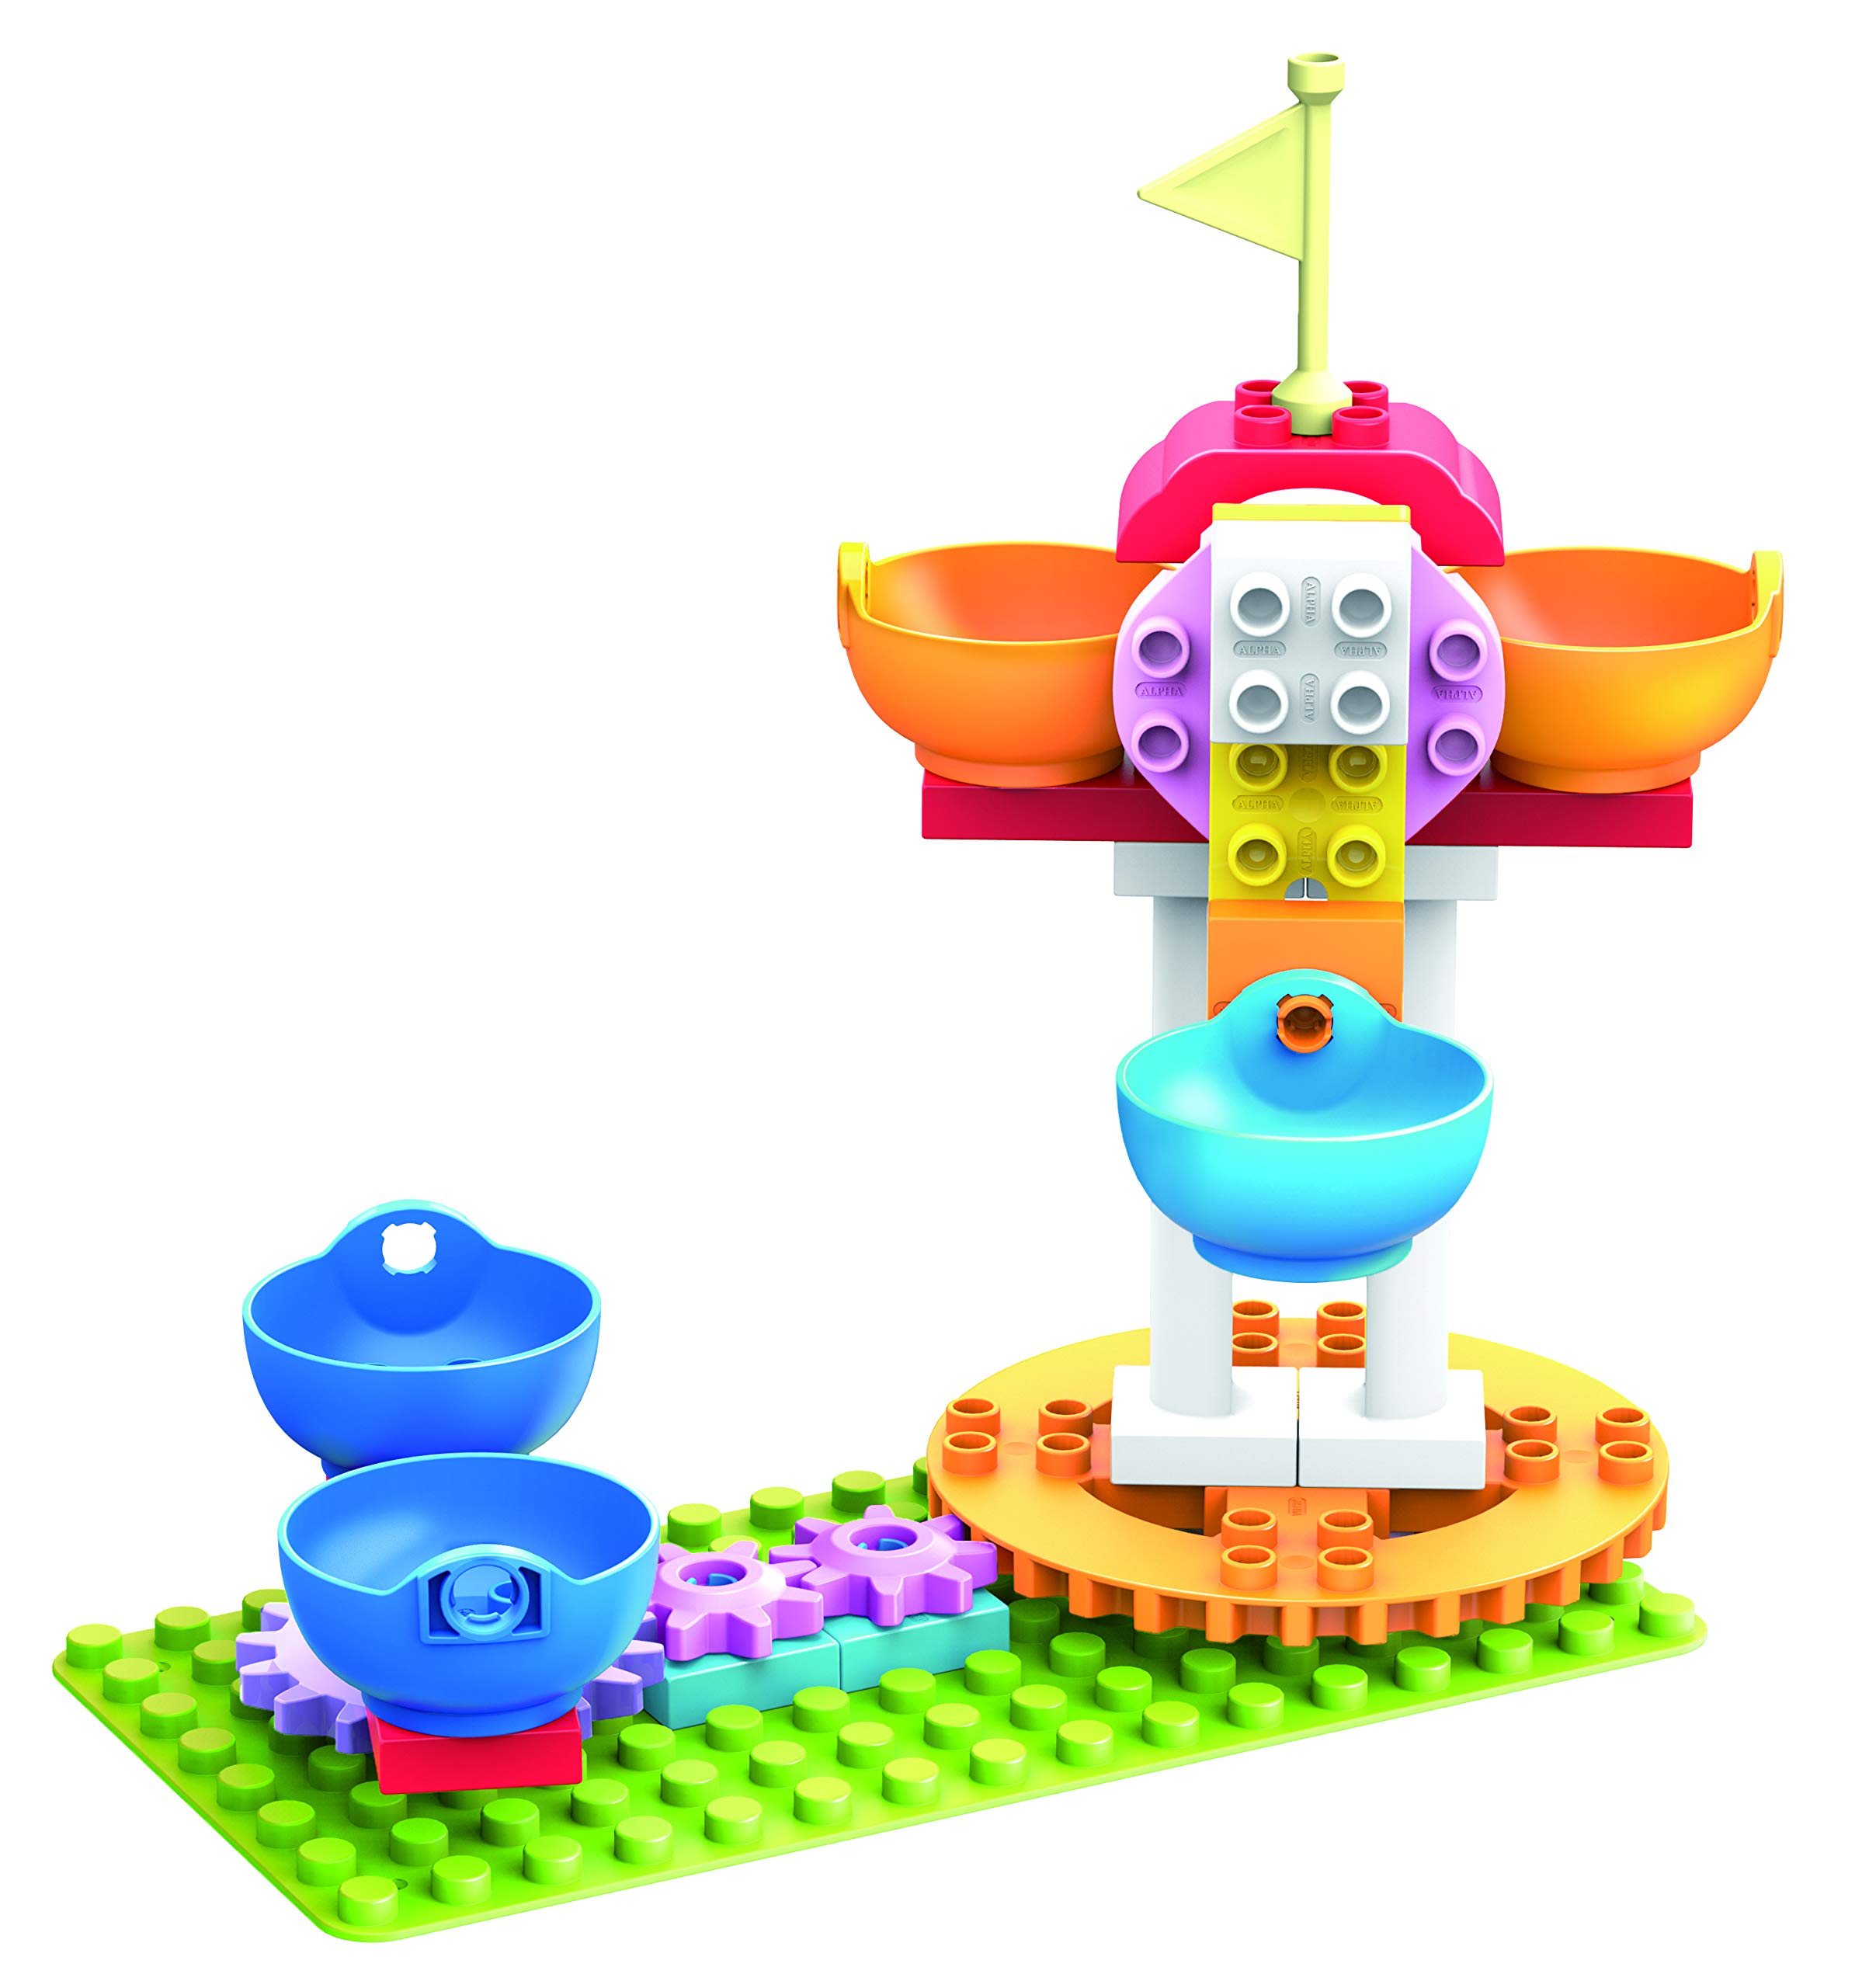 Super Wings - Medium Blocks Play Set - Gear Building Bucket - Building Blocks for 3 4 5 Year Old Boys and Girls - Birthday Gift for Kids - Educational Stem Building Kit - Airplane Stickers Included